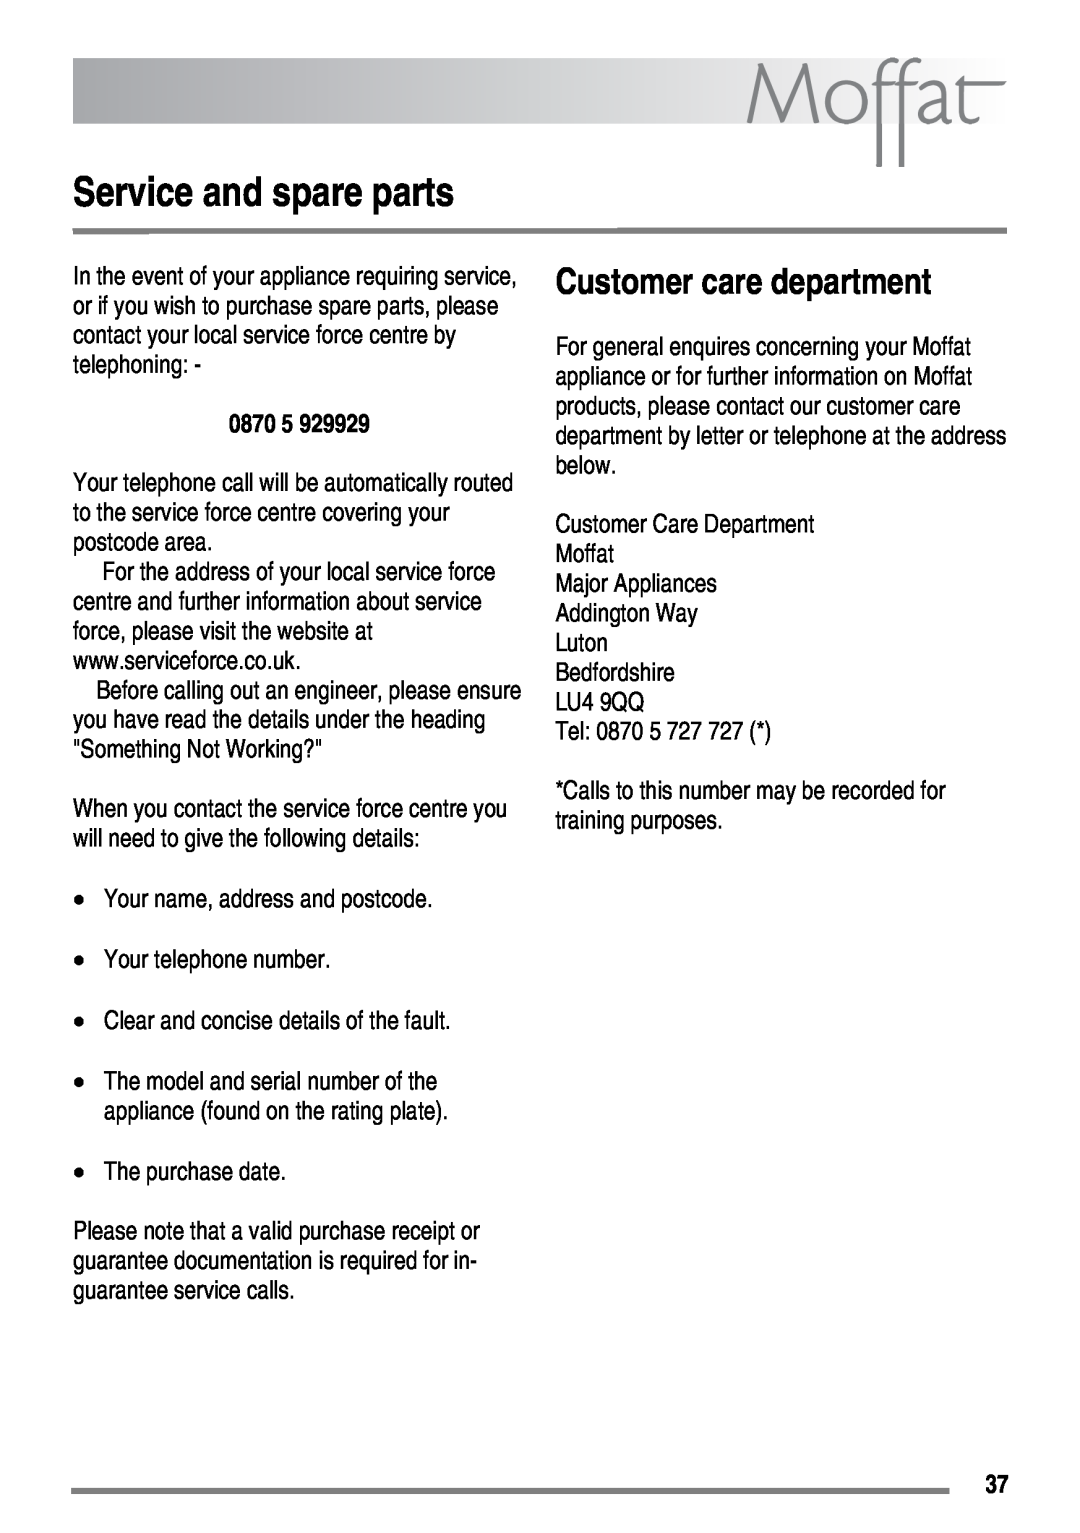 Moffat MDB900 user manual Service and spare parts, Customer care department, 0870 